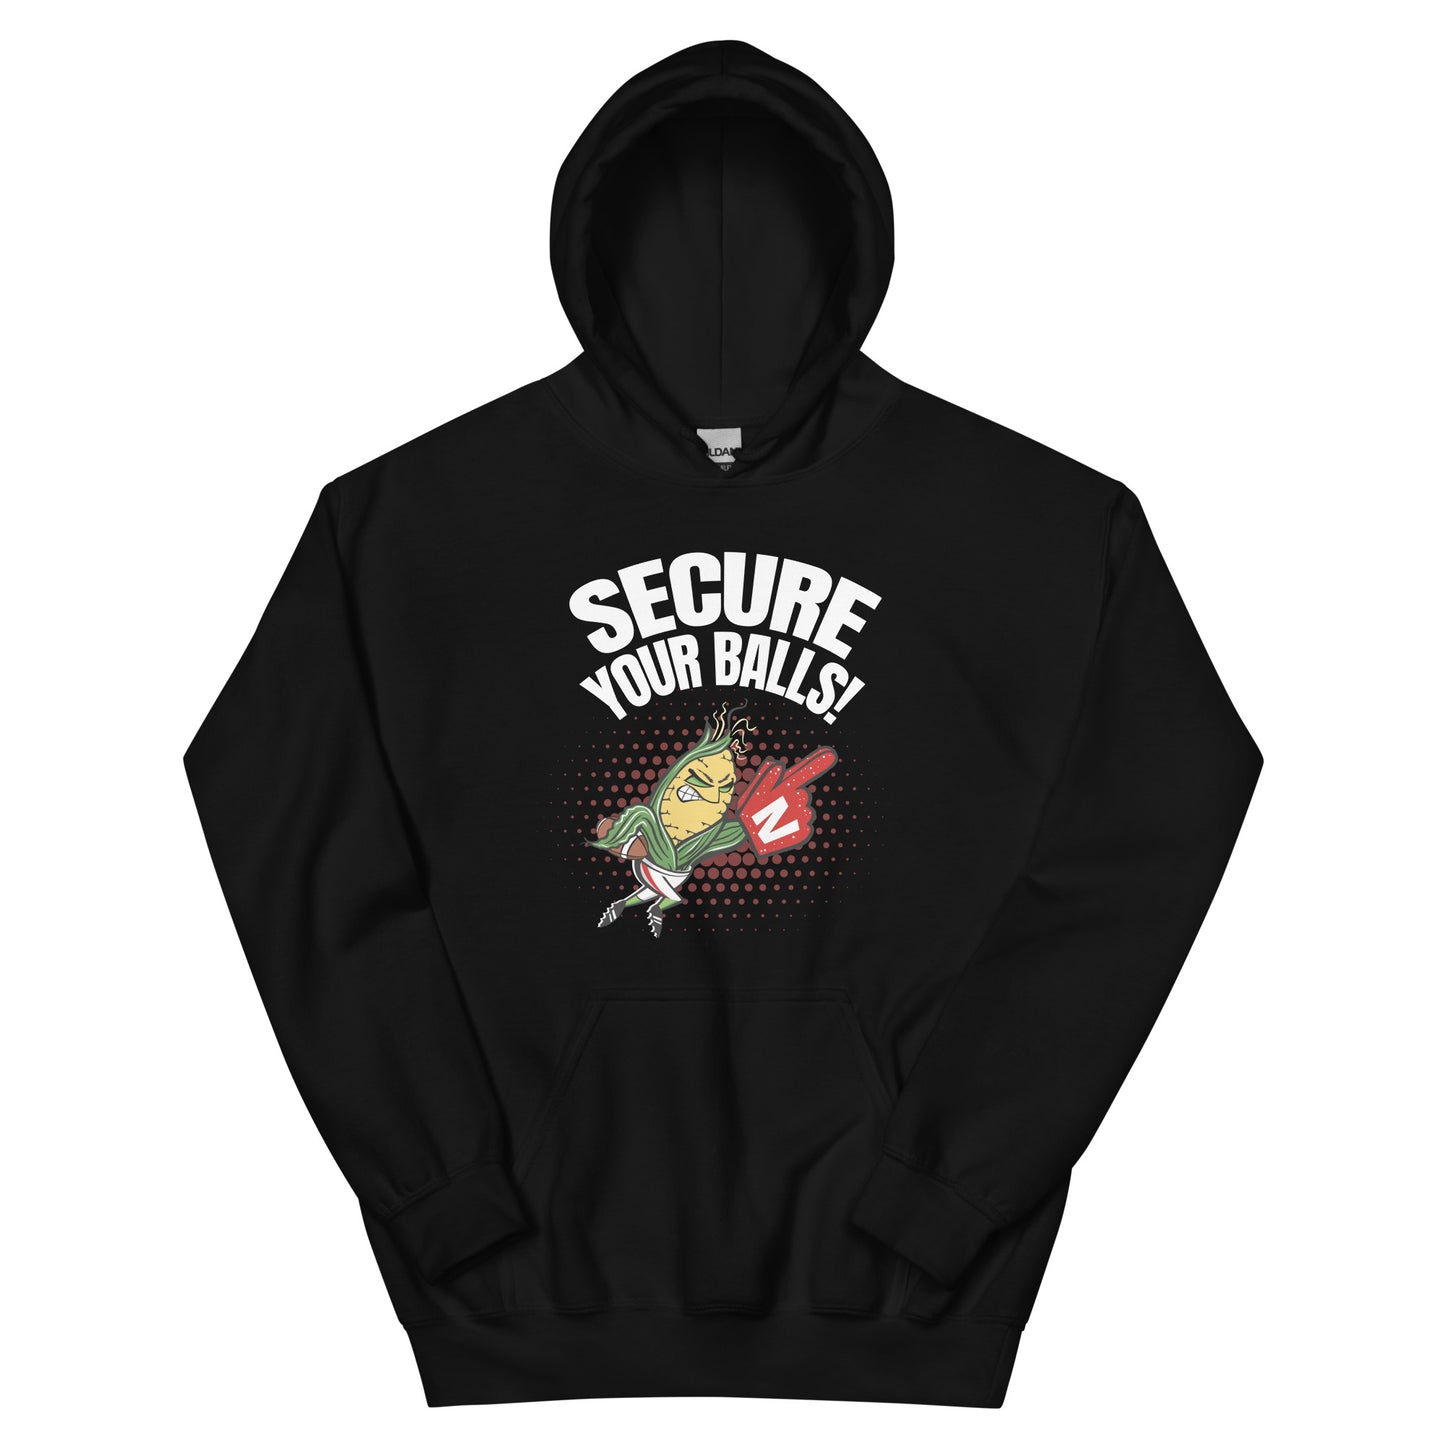 Secure Your Balls! - Unisex Hoodie